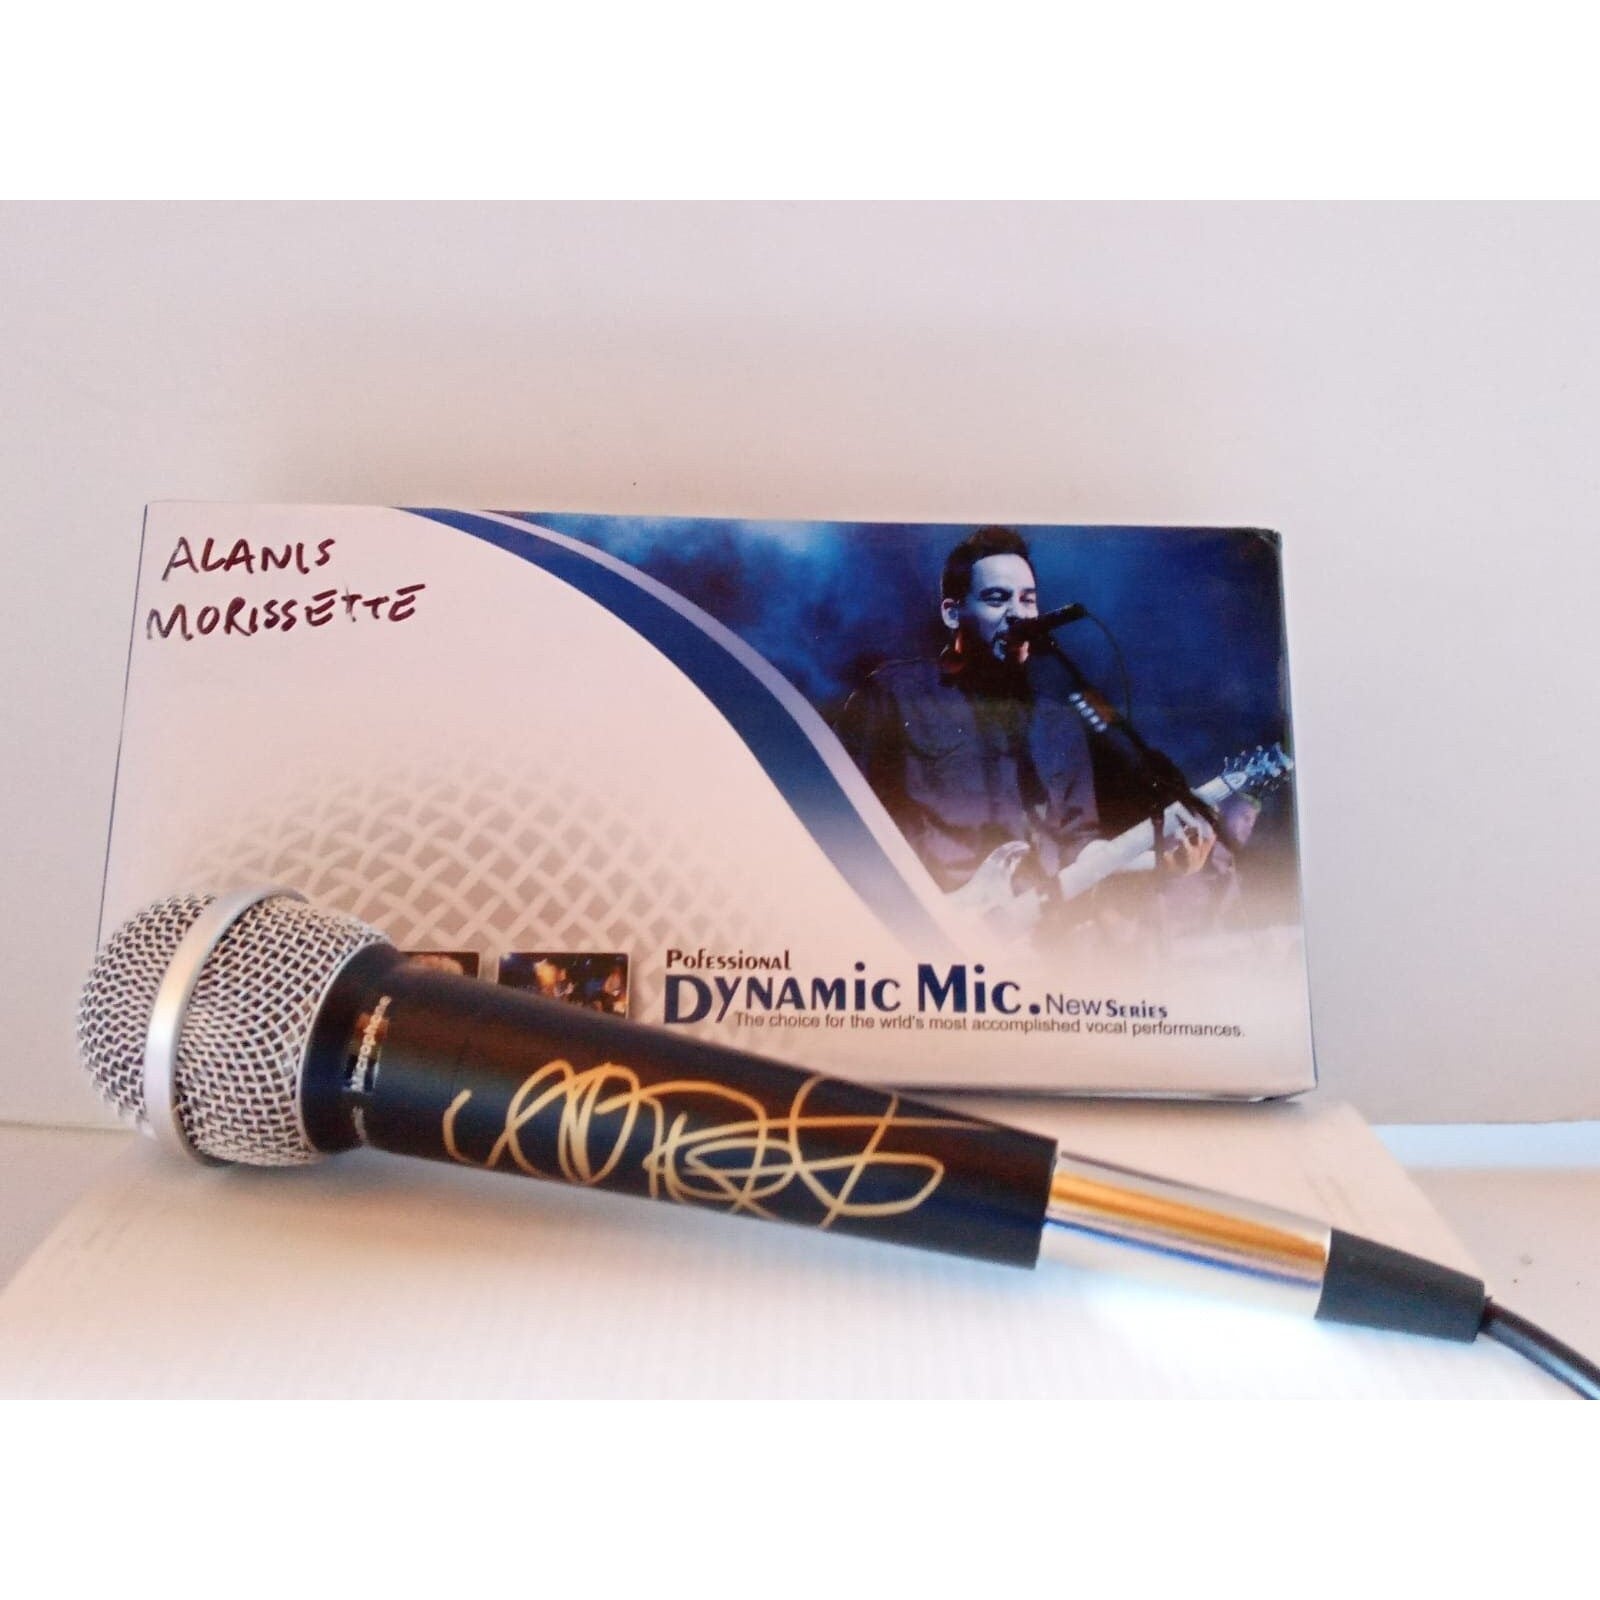 Alanis Morissette signed microphone